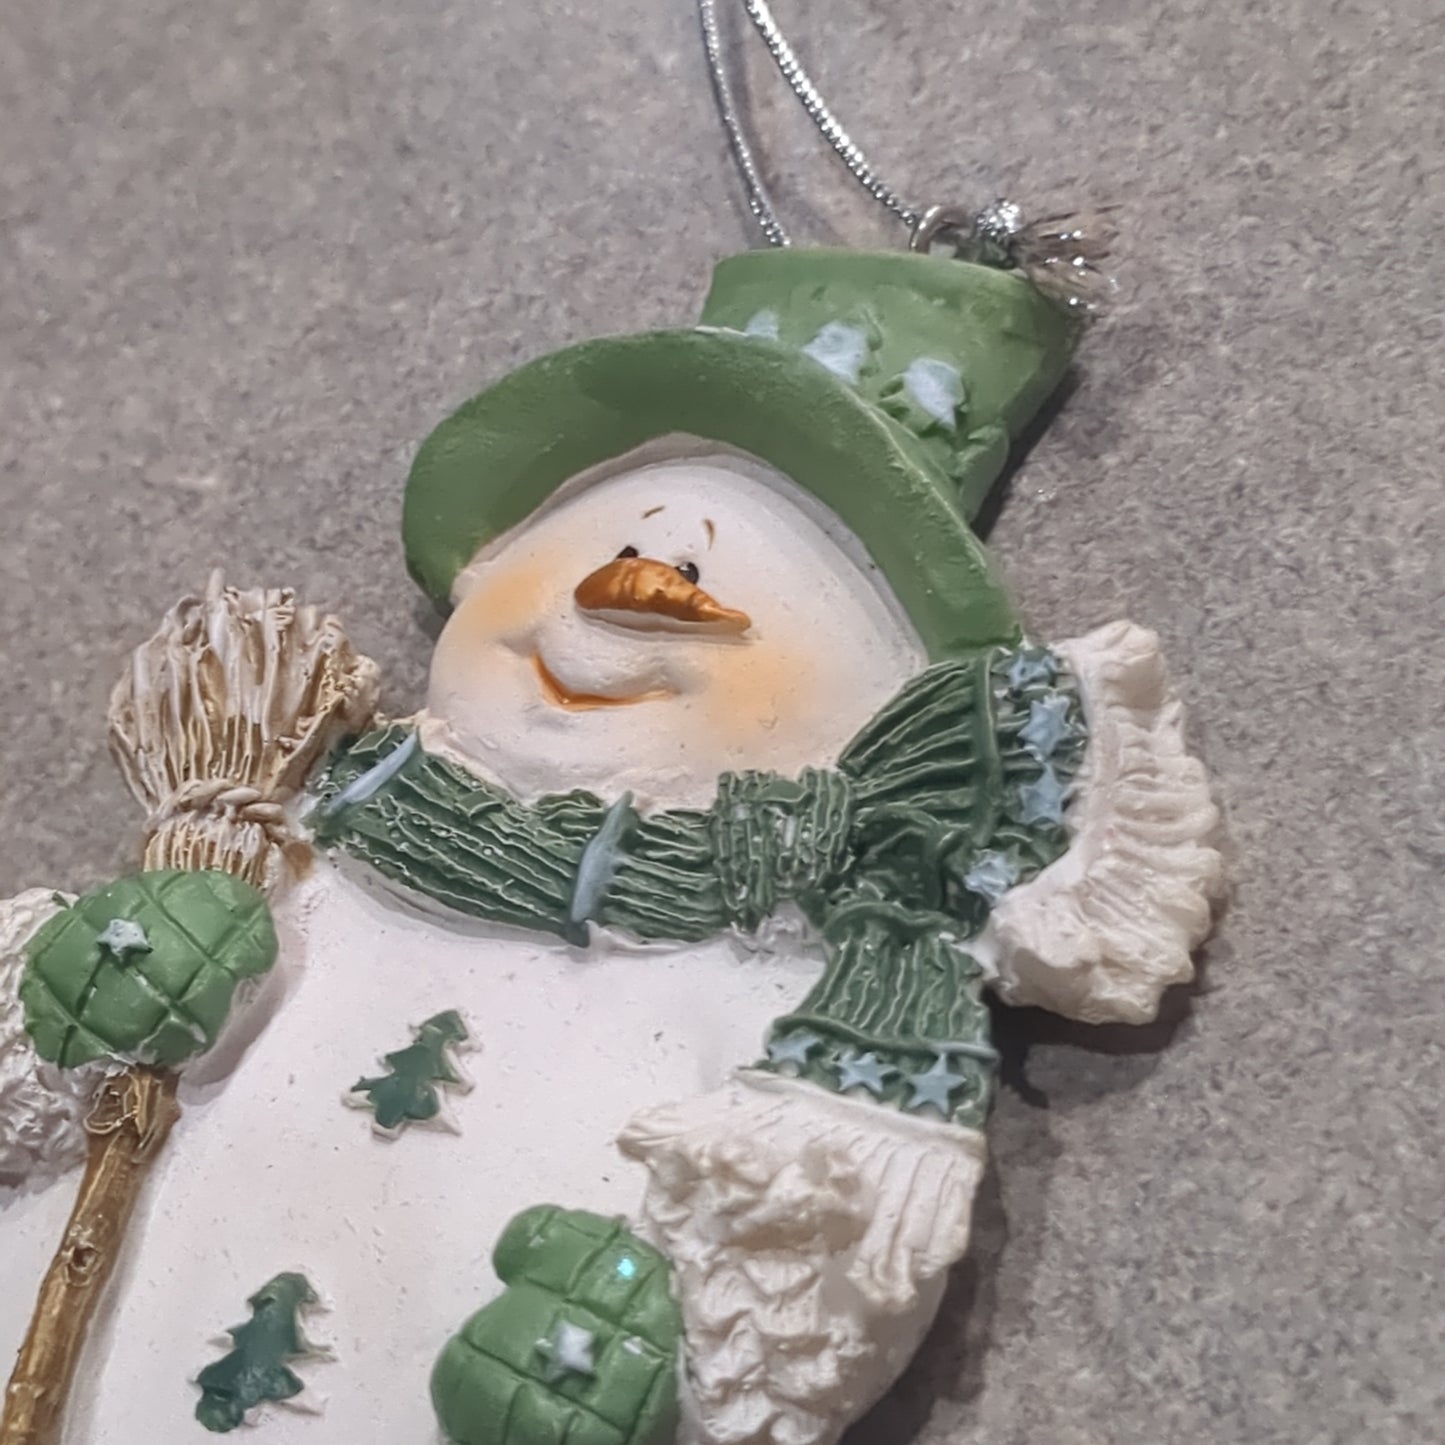 Polycrylic snowman ornament with a broom - green